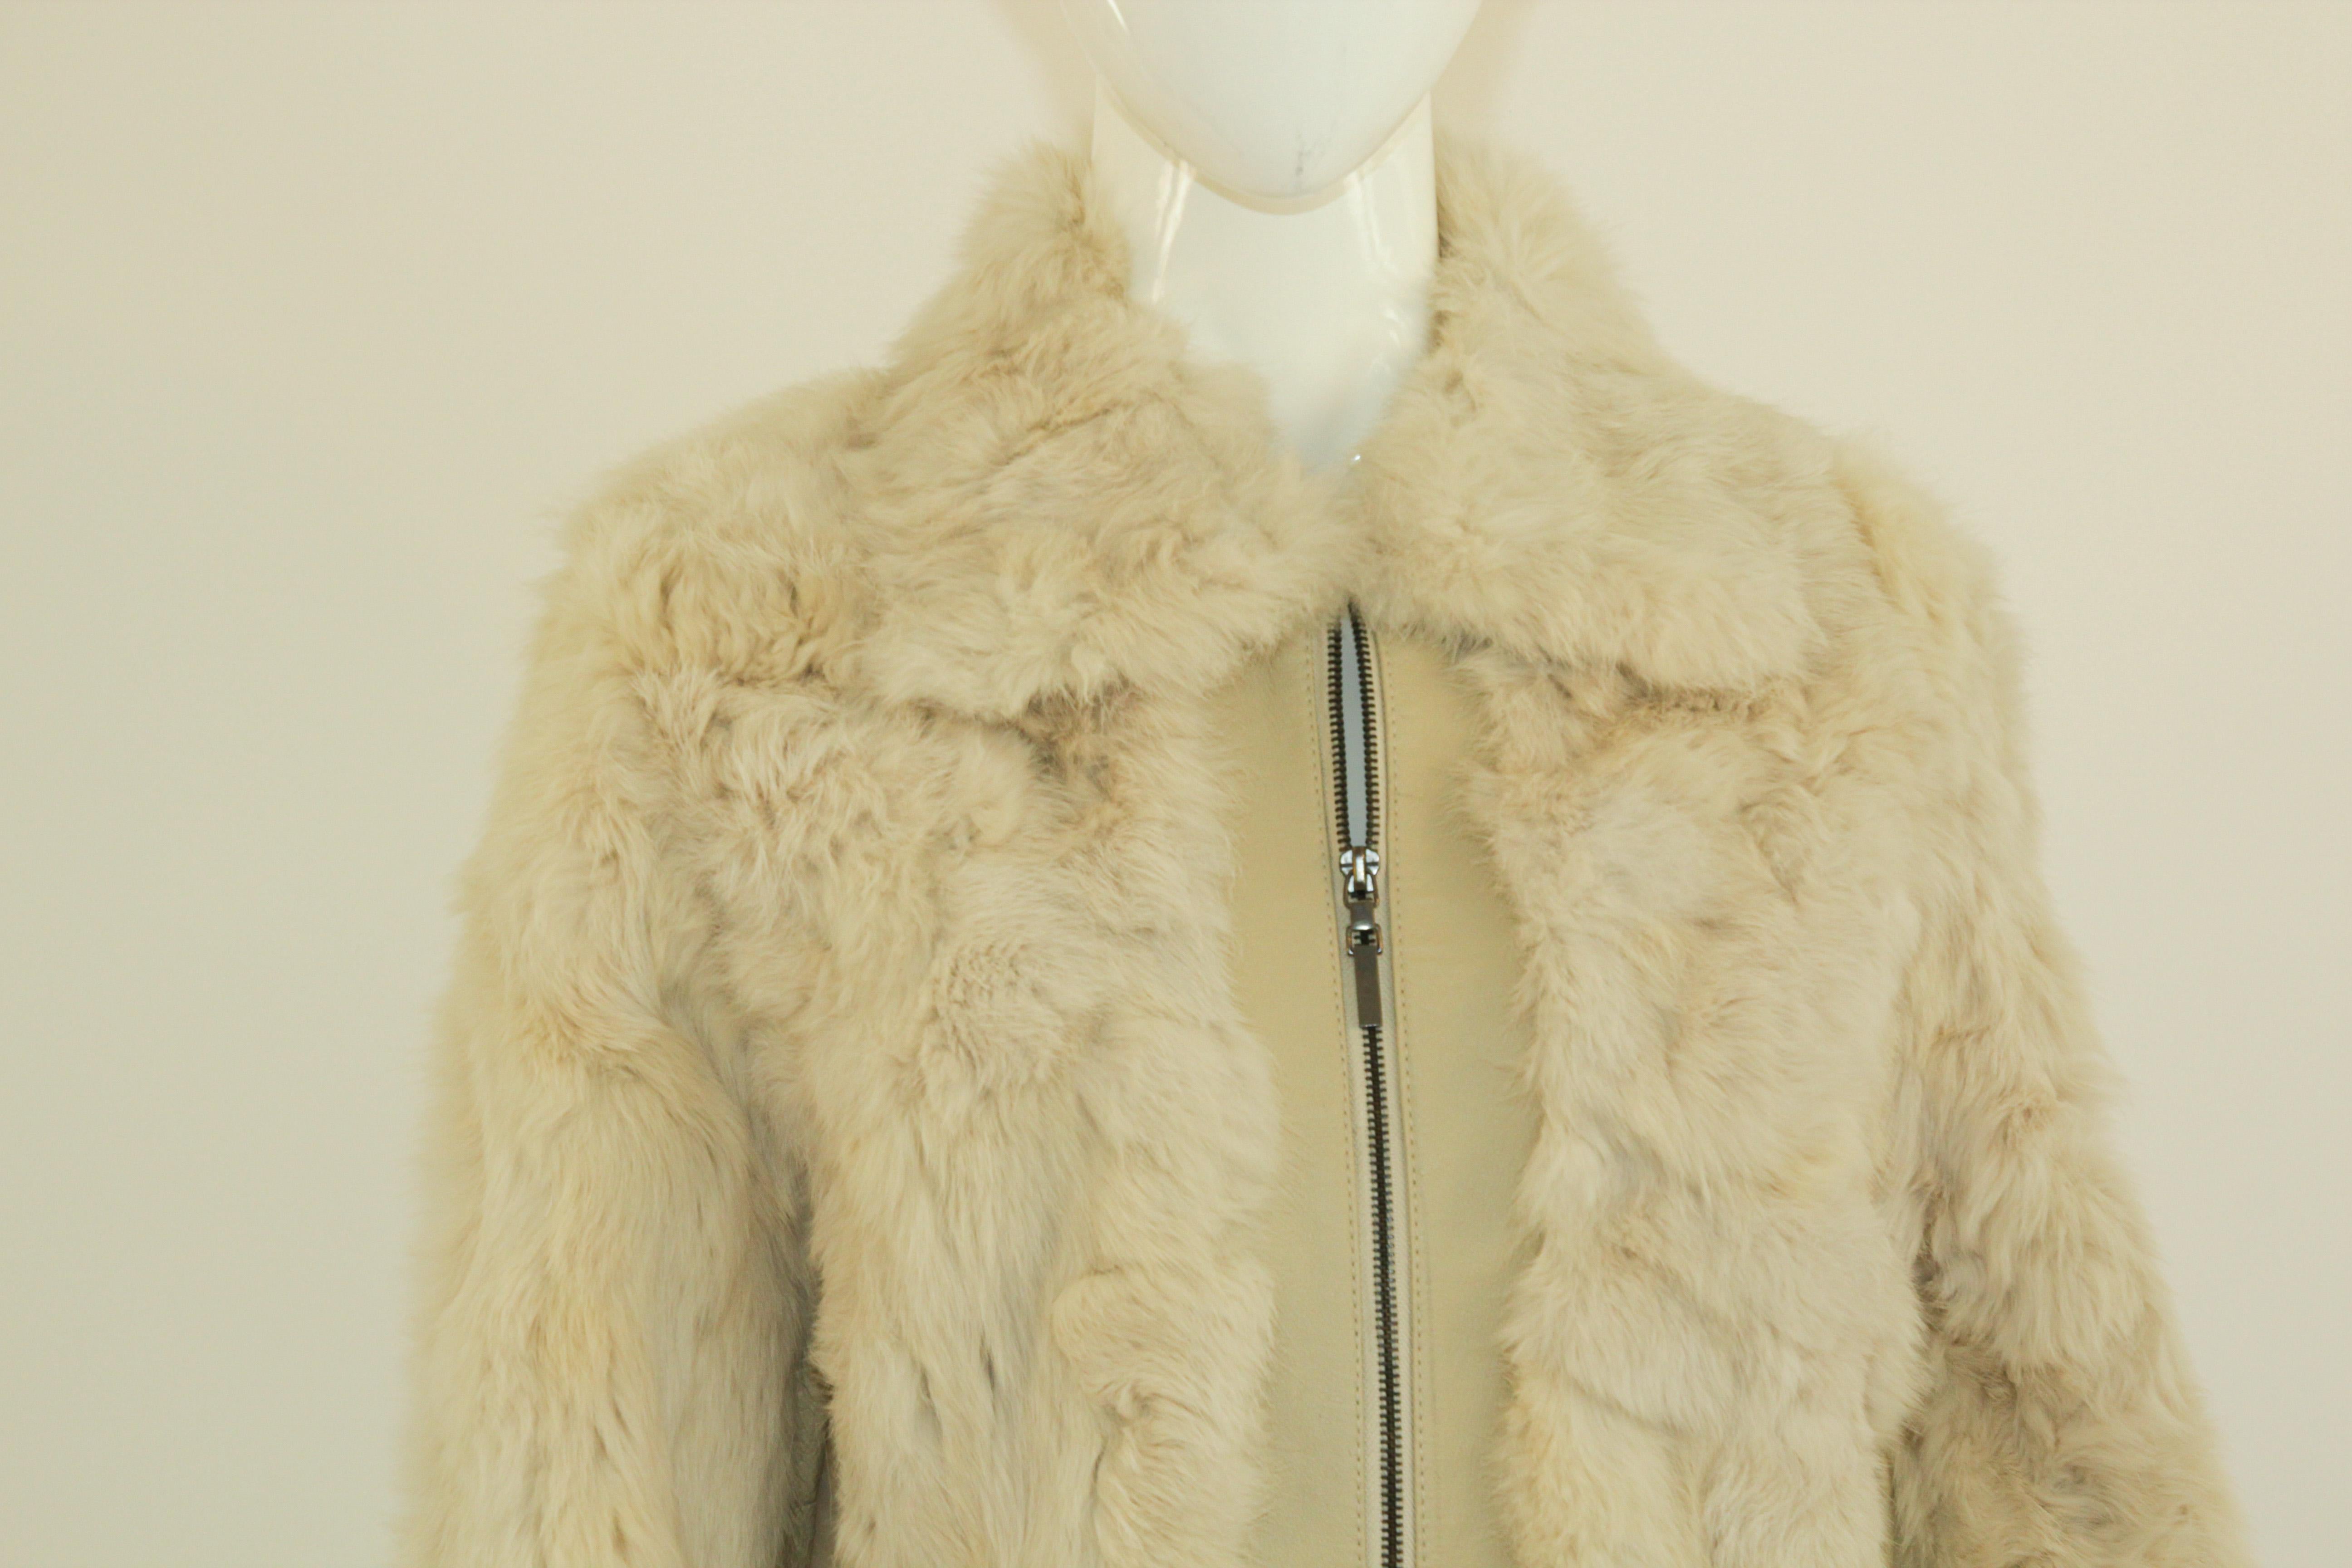 Vintage white leather and fur coat with front zipper.
Vintage Maxi long white leather coat from the 1970's.
Shell 100% genuine fur and leather, lining 100% polyester. 
Do not dry clean, specialist clean only.
Designed by Jennyfer J. 
Size